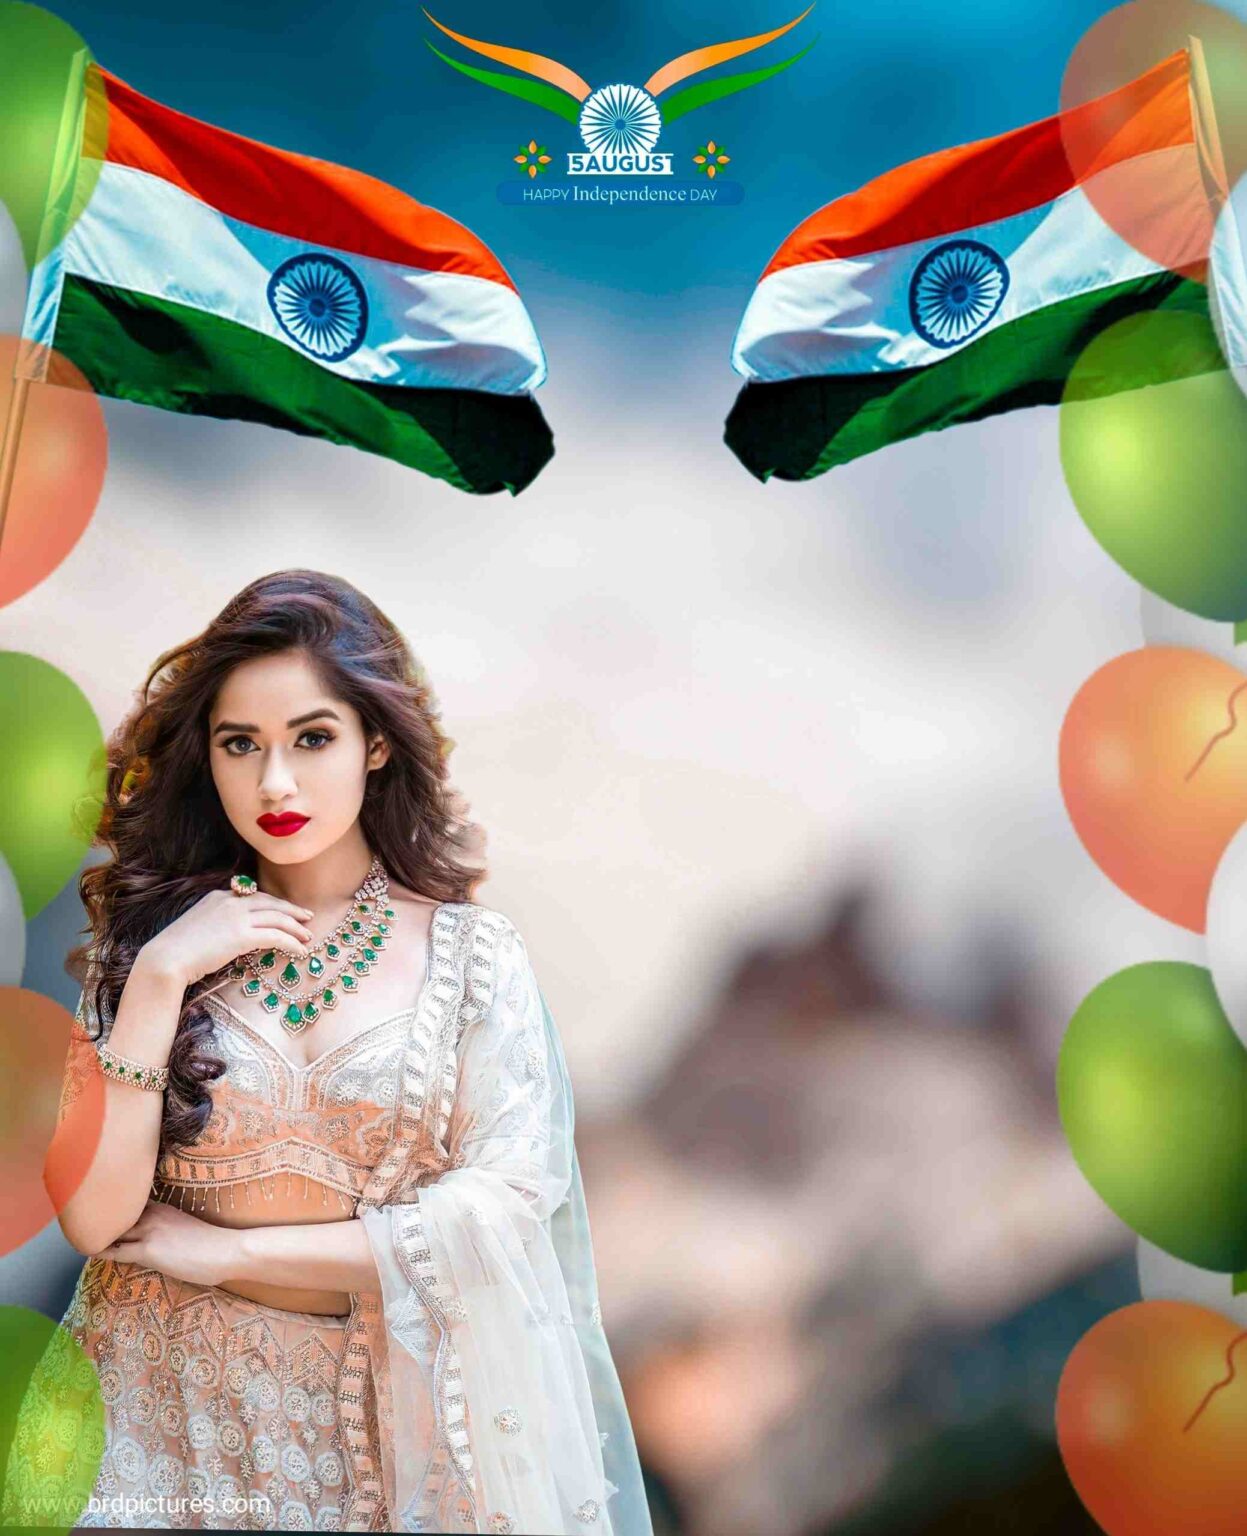 Happy Independence Day Editing Background with Girl